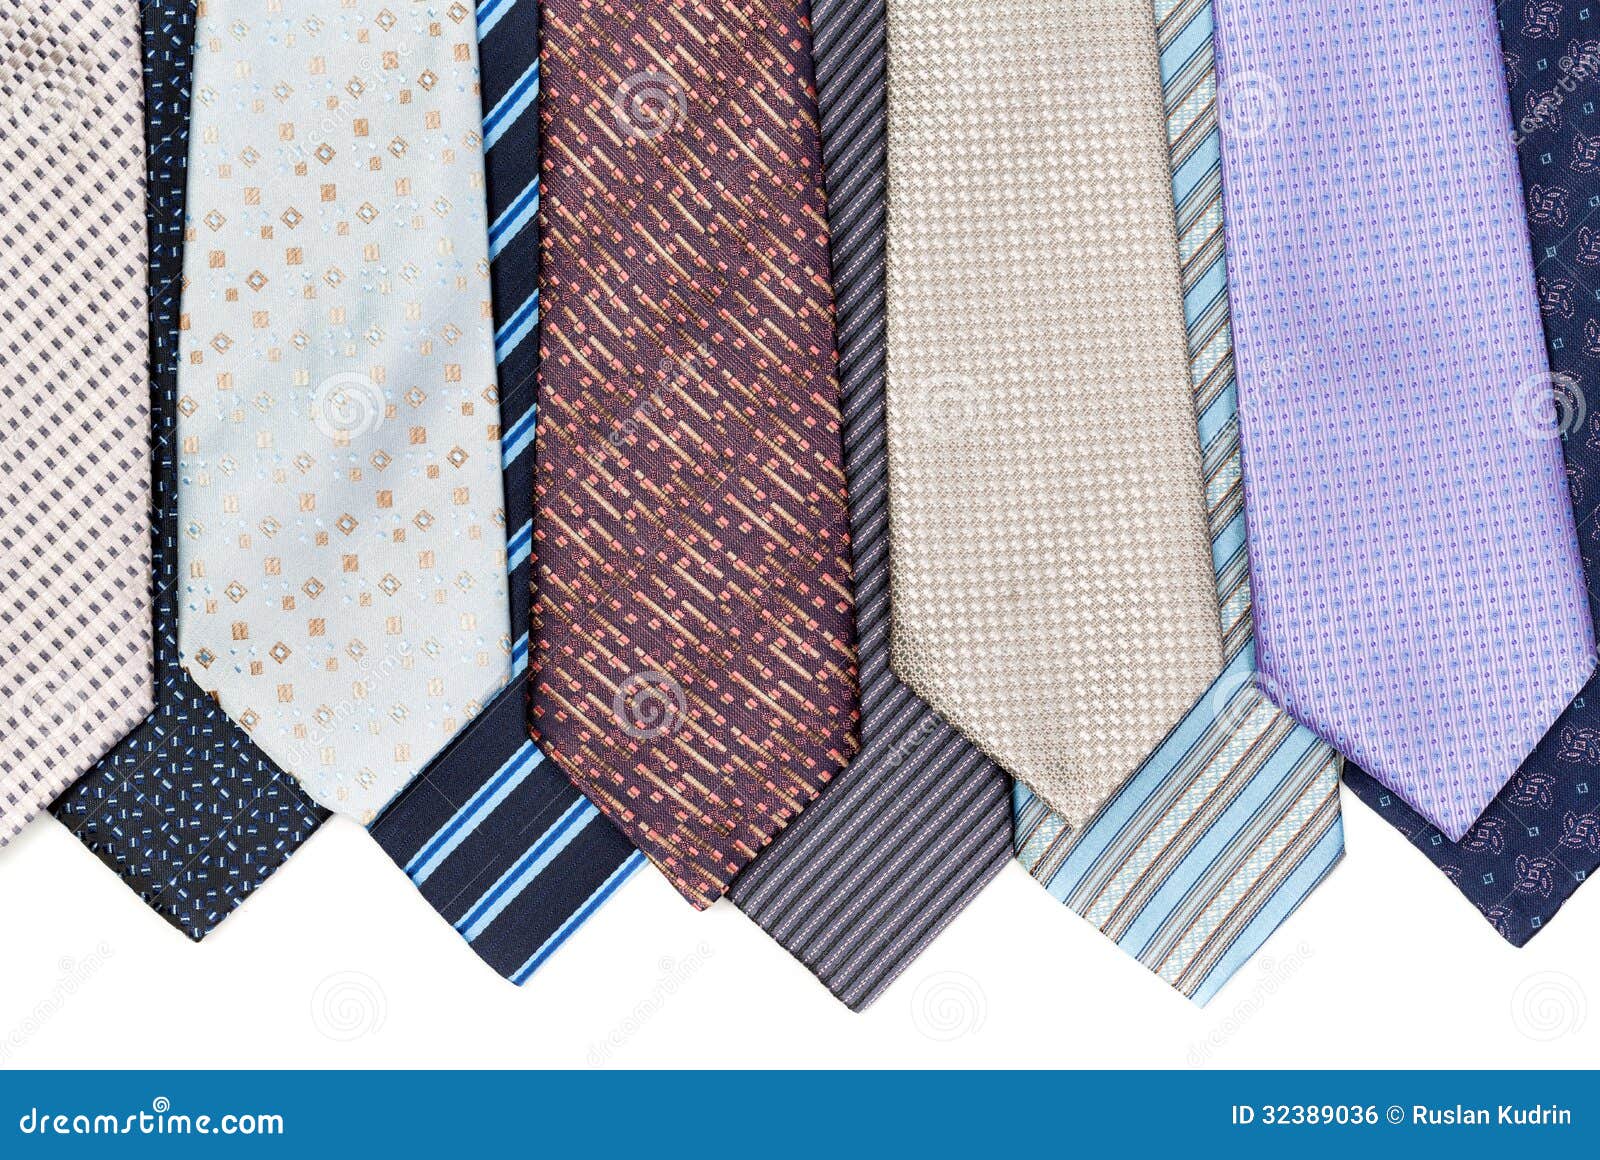 Background of ties stock photo. Image of front, copy - 32389036